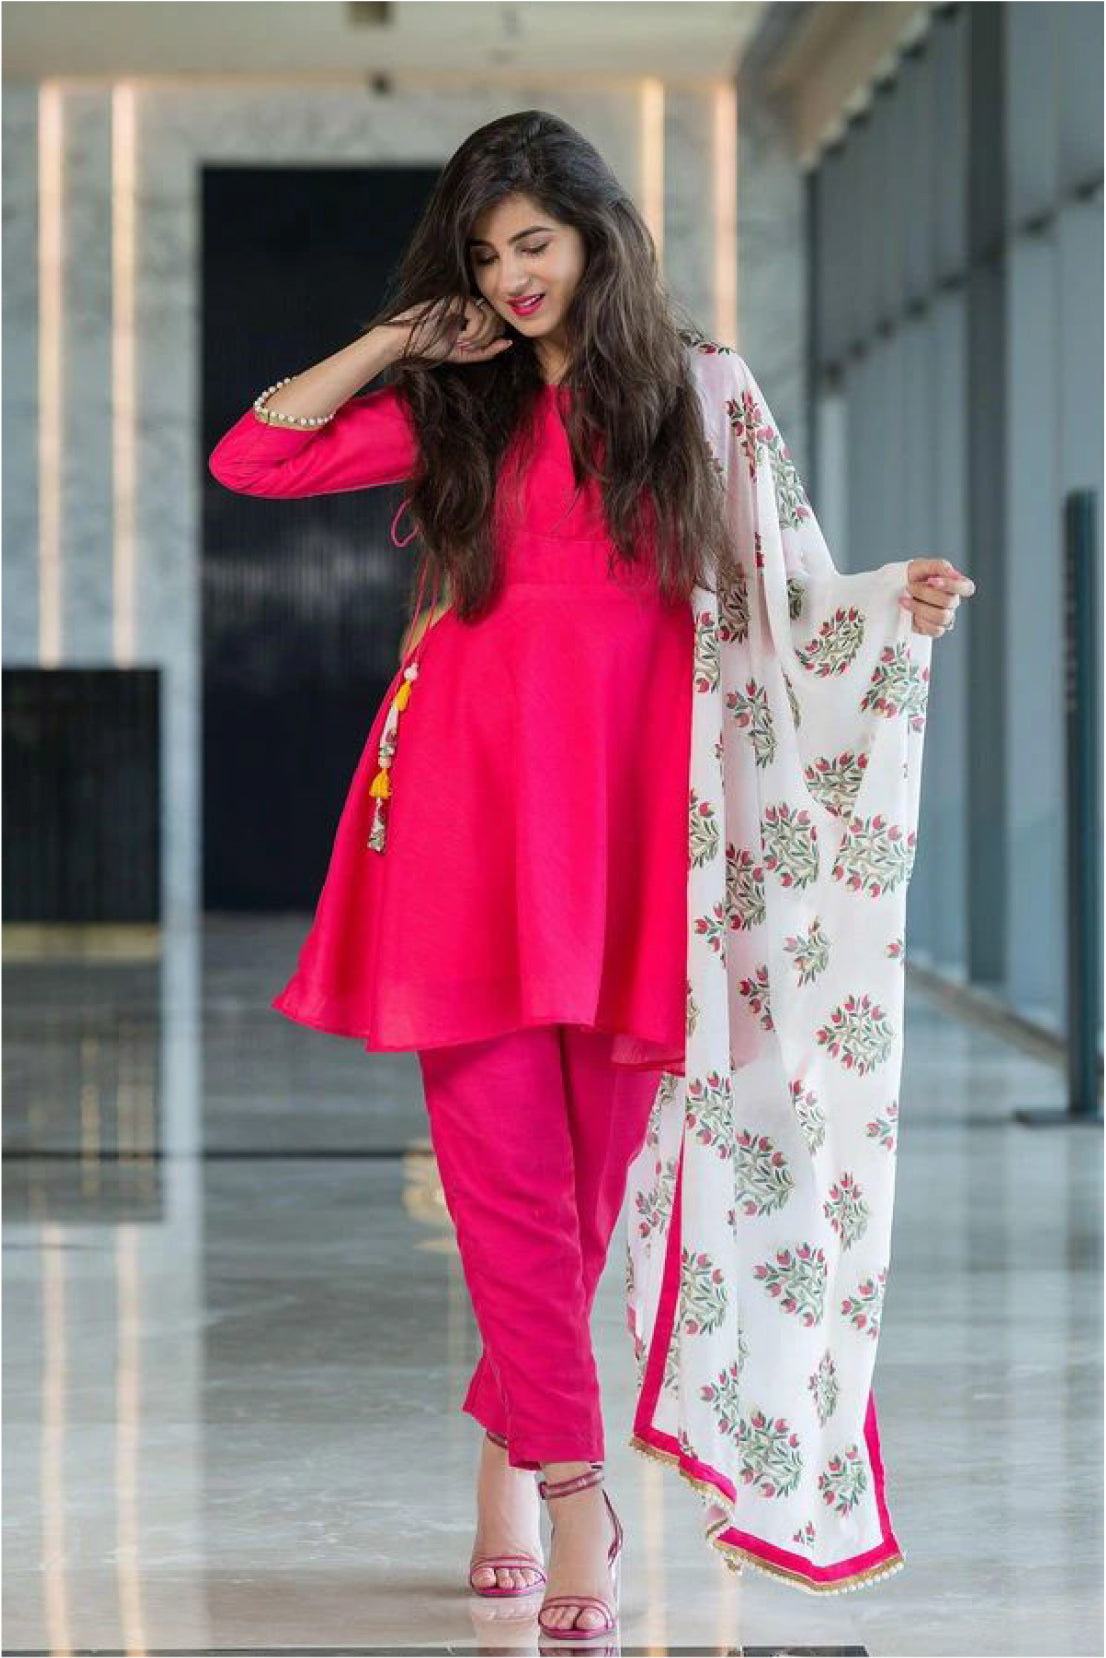 5 Best Tips To Know-How To Style Perfectly If You Love Indian